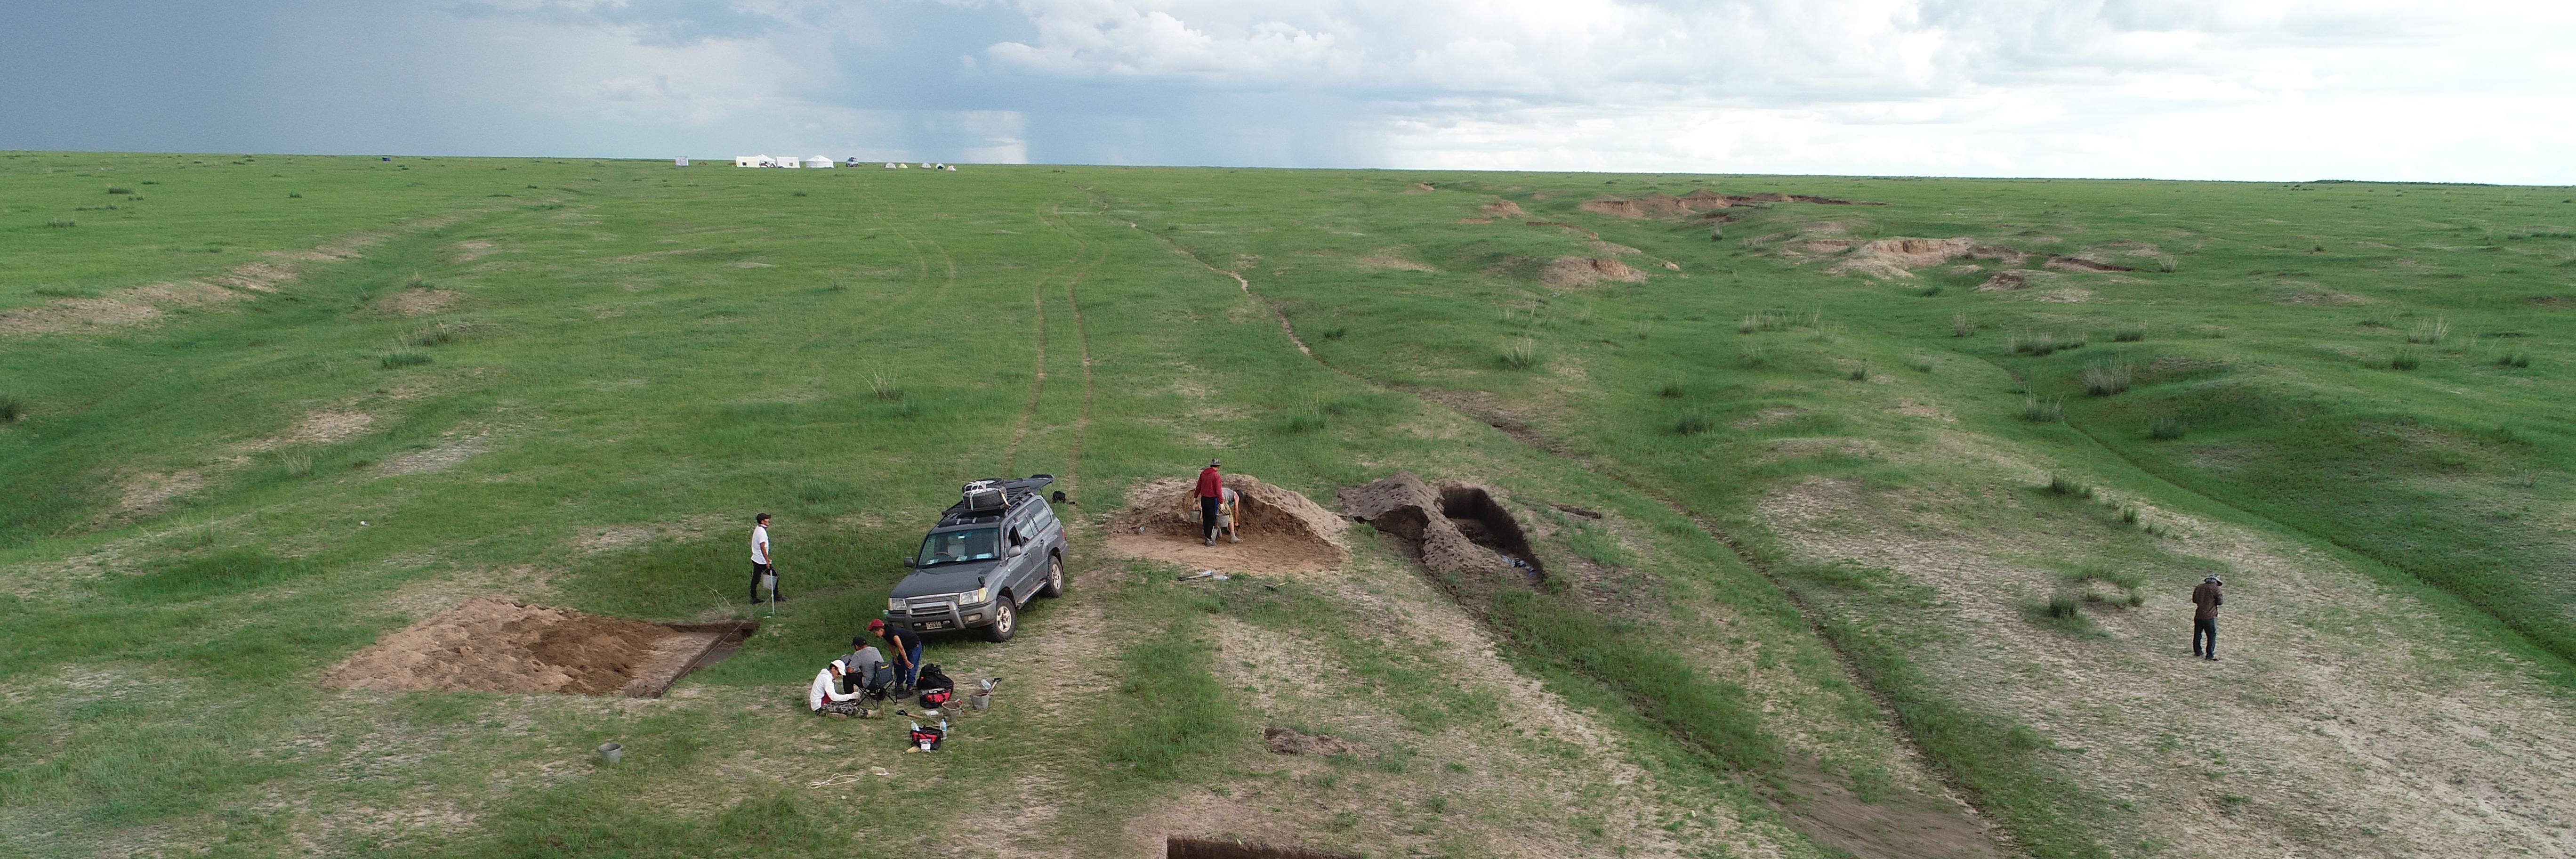 Archaeologists work on excavating a home in the foreground, with a wide expanse of steppe behind